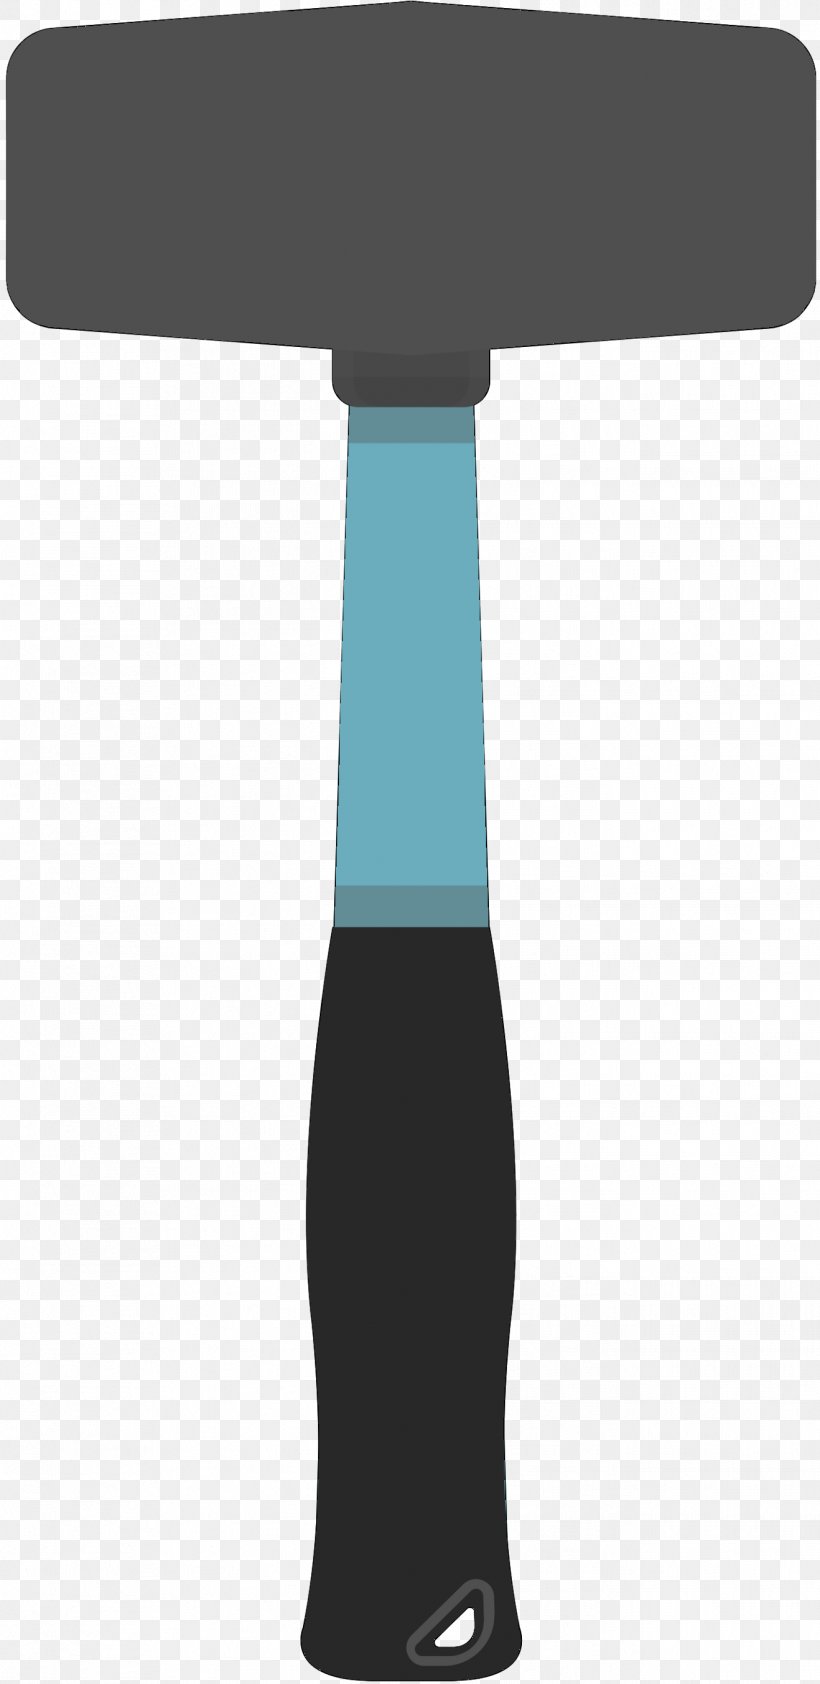 Product Design Hammer Font Angle, PNG, 1318x2708px, Hammer, Furniture, Table, Teal, Turquoise Download Free